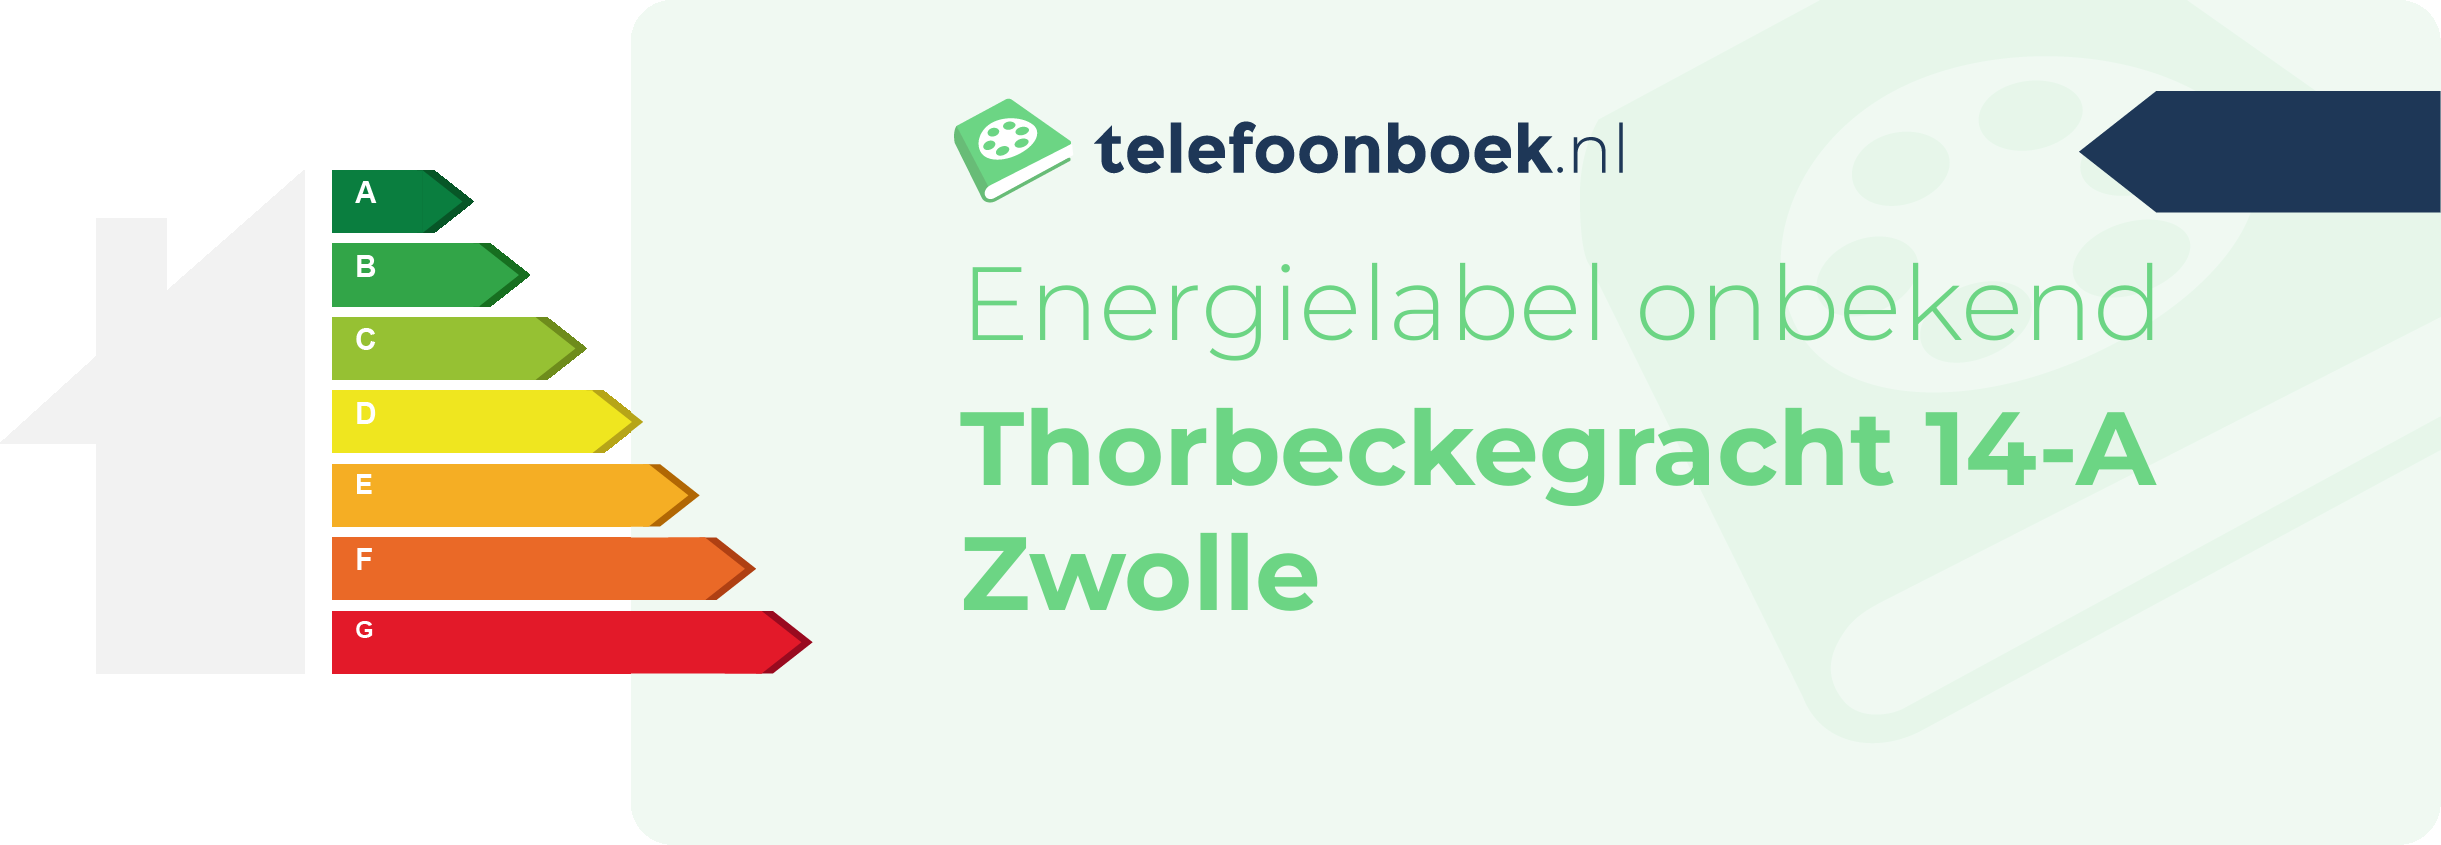 Energielabel Thorbeckegracht 14-A Zwolle